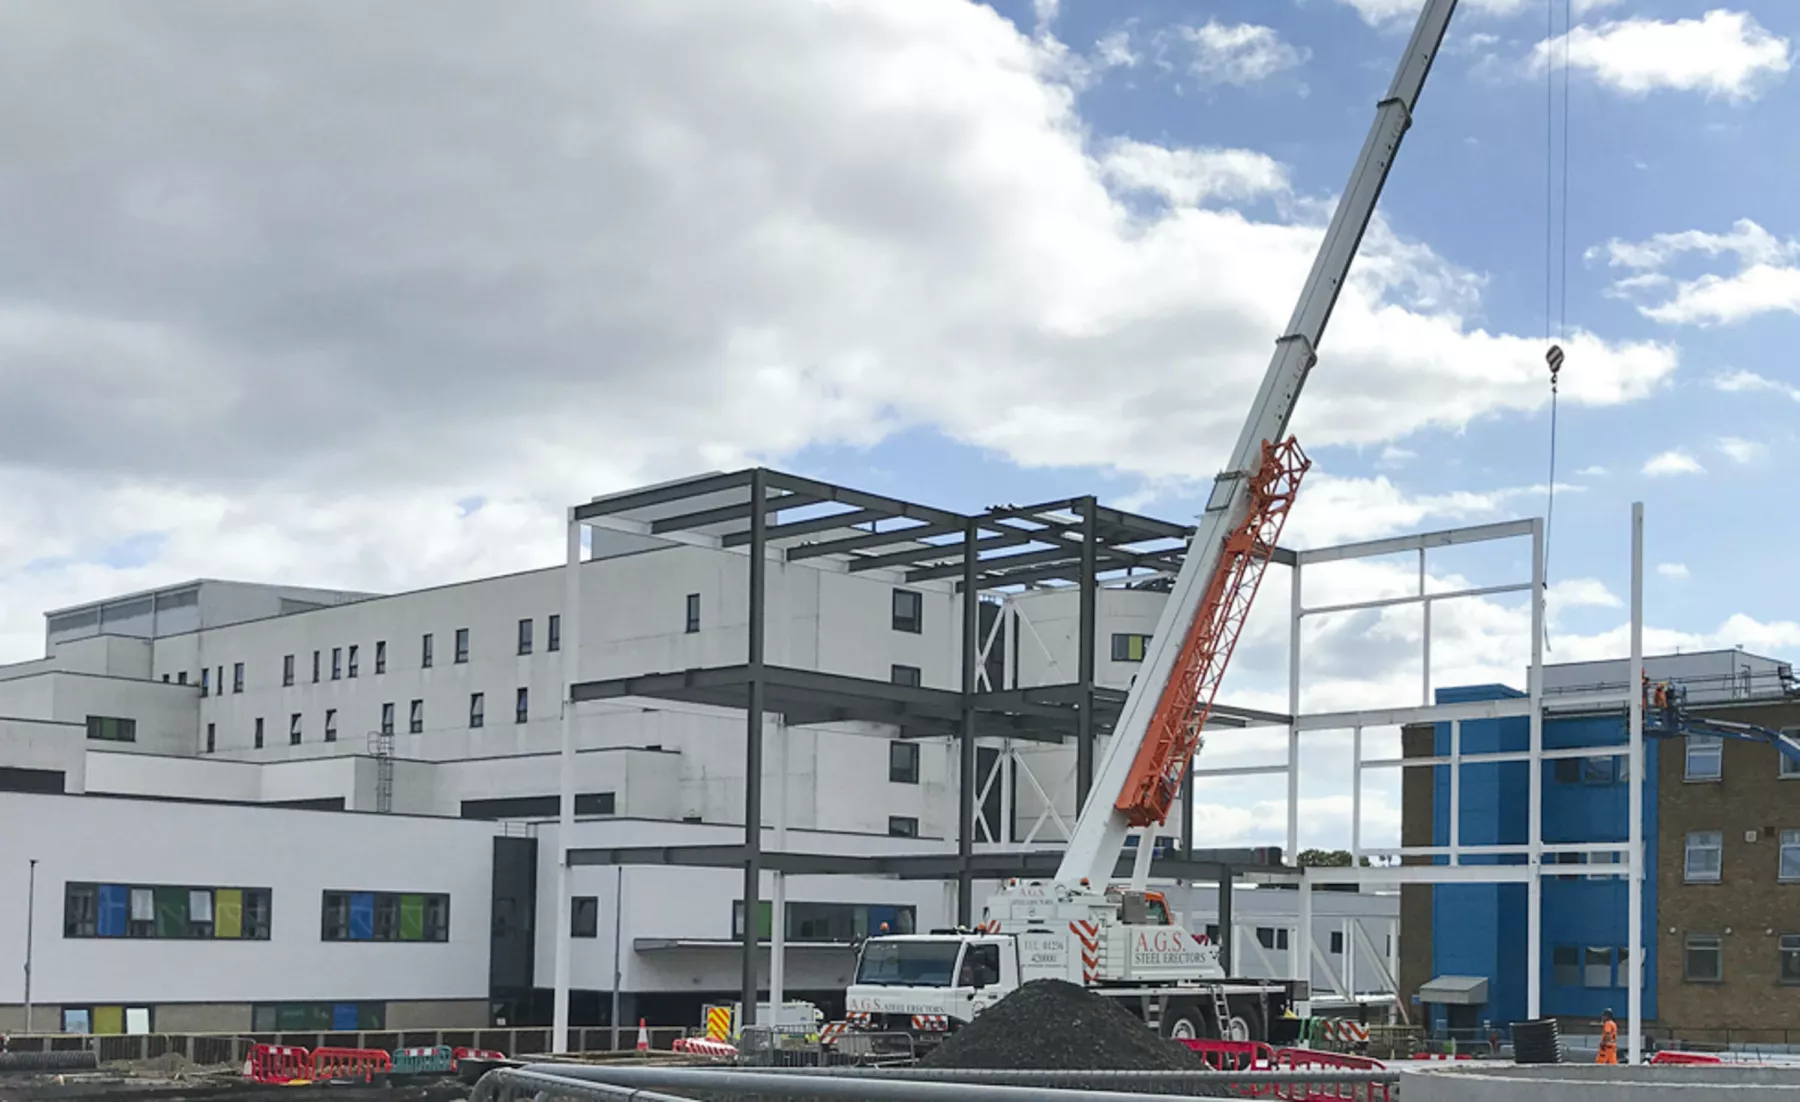 The National Treatment Centre - Fife Orthopaedics under construction. Steel framework is being put in place with use of a crane.